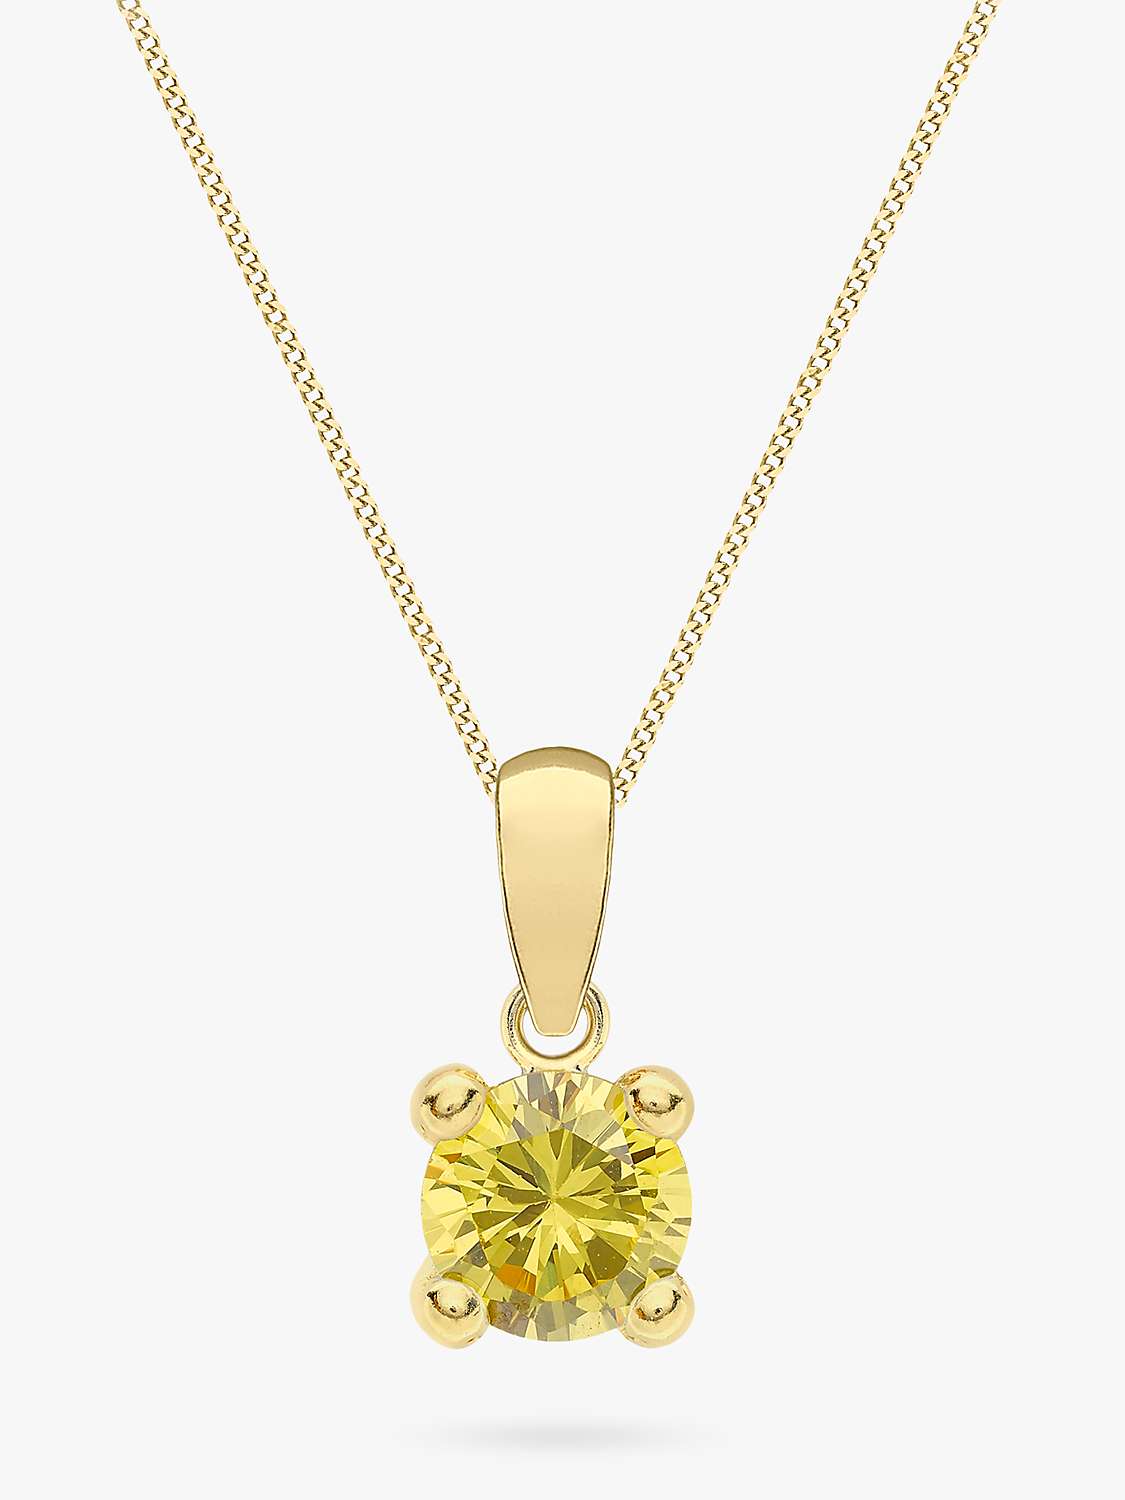 Buy IBB 9ct Yellow Gold Round Cubic Zirconia Pendant Necklace Online at johnlewis.com